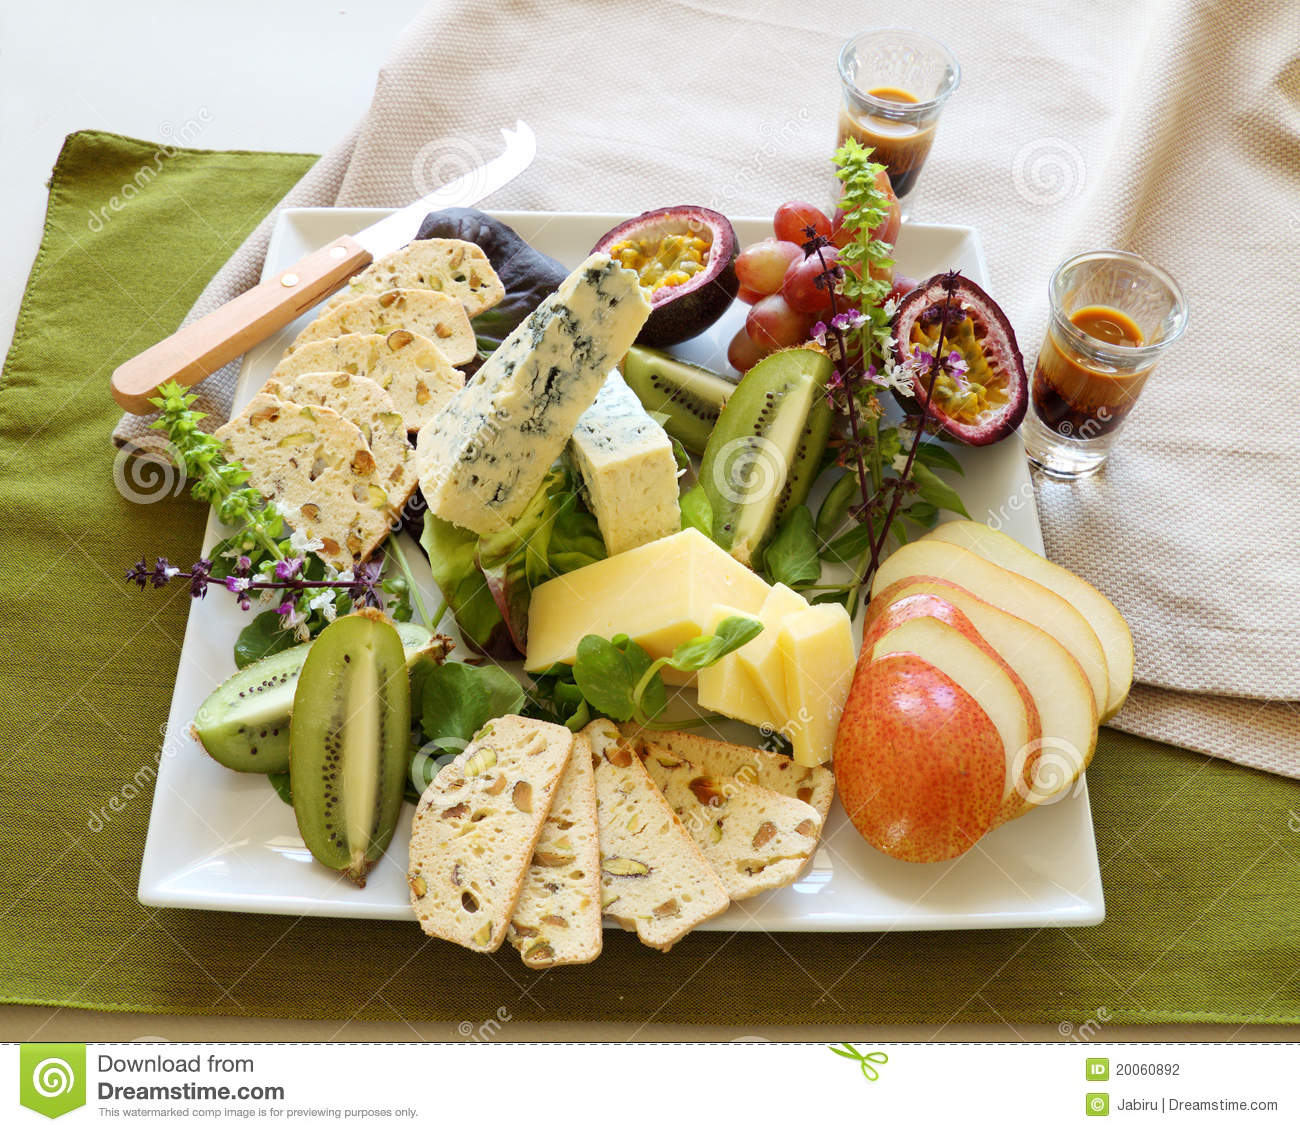 Delicious Fruit And Cheese Platter Featuring A Variety Of Different